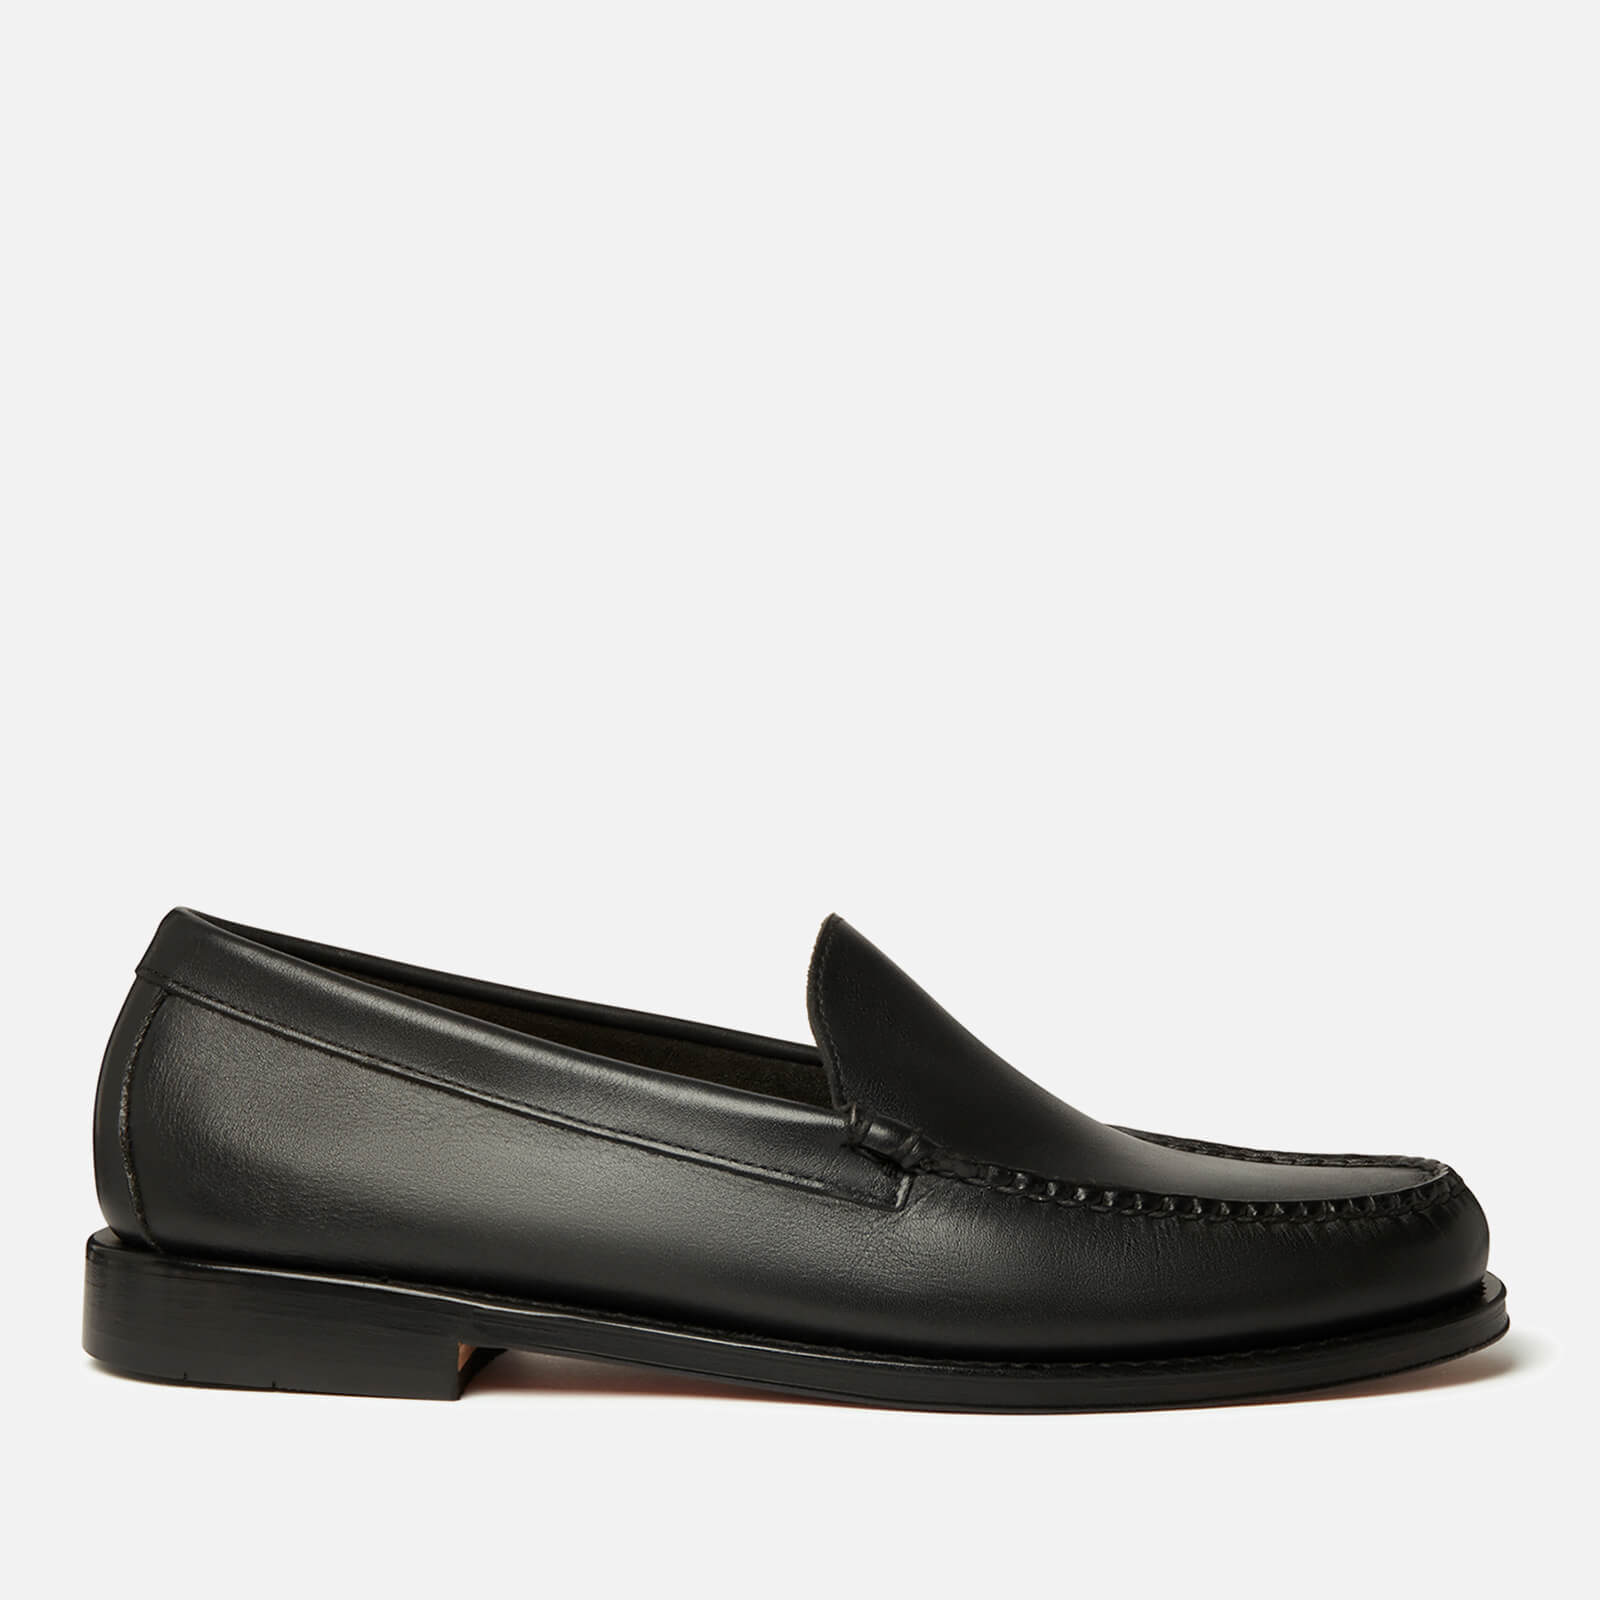 G.H Bass Men’s Venetian Leather Loafers